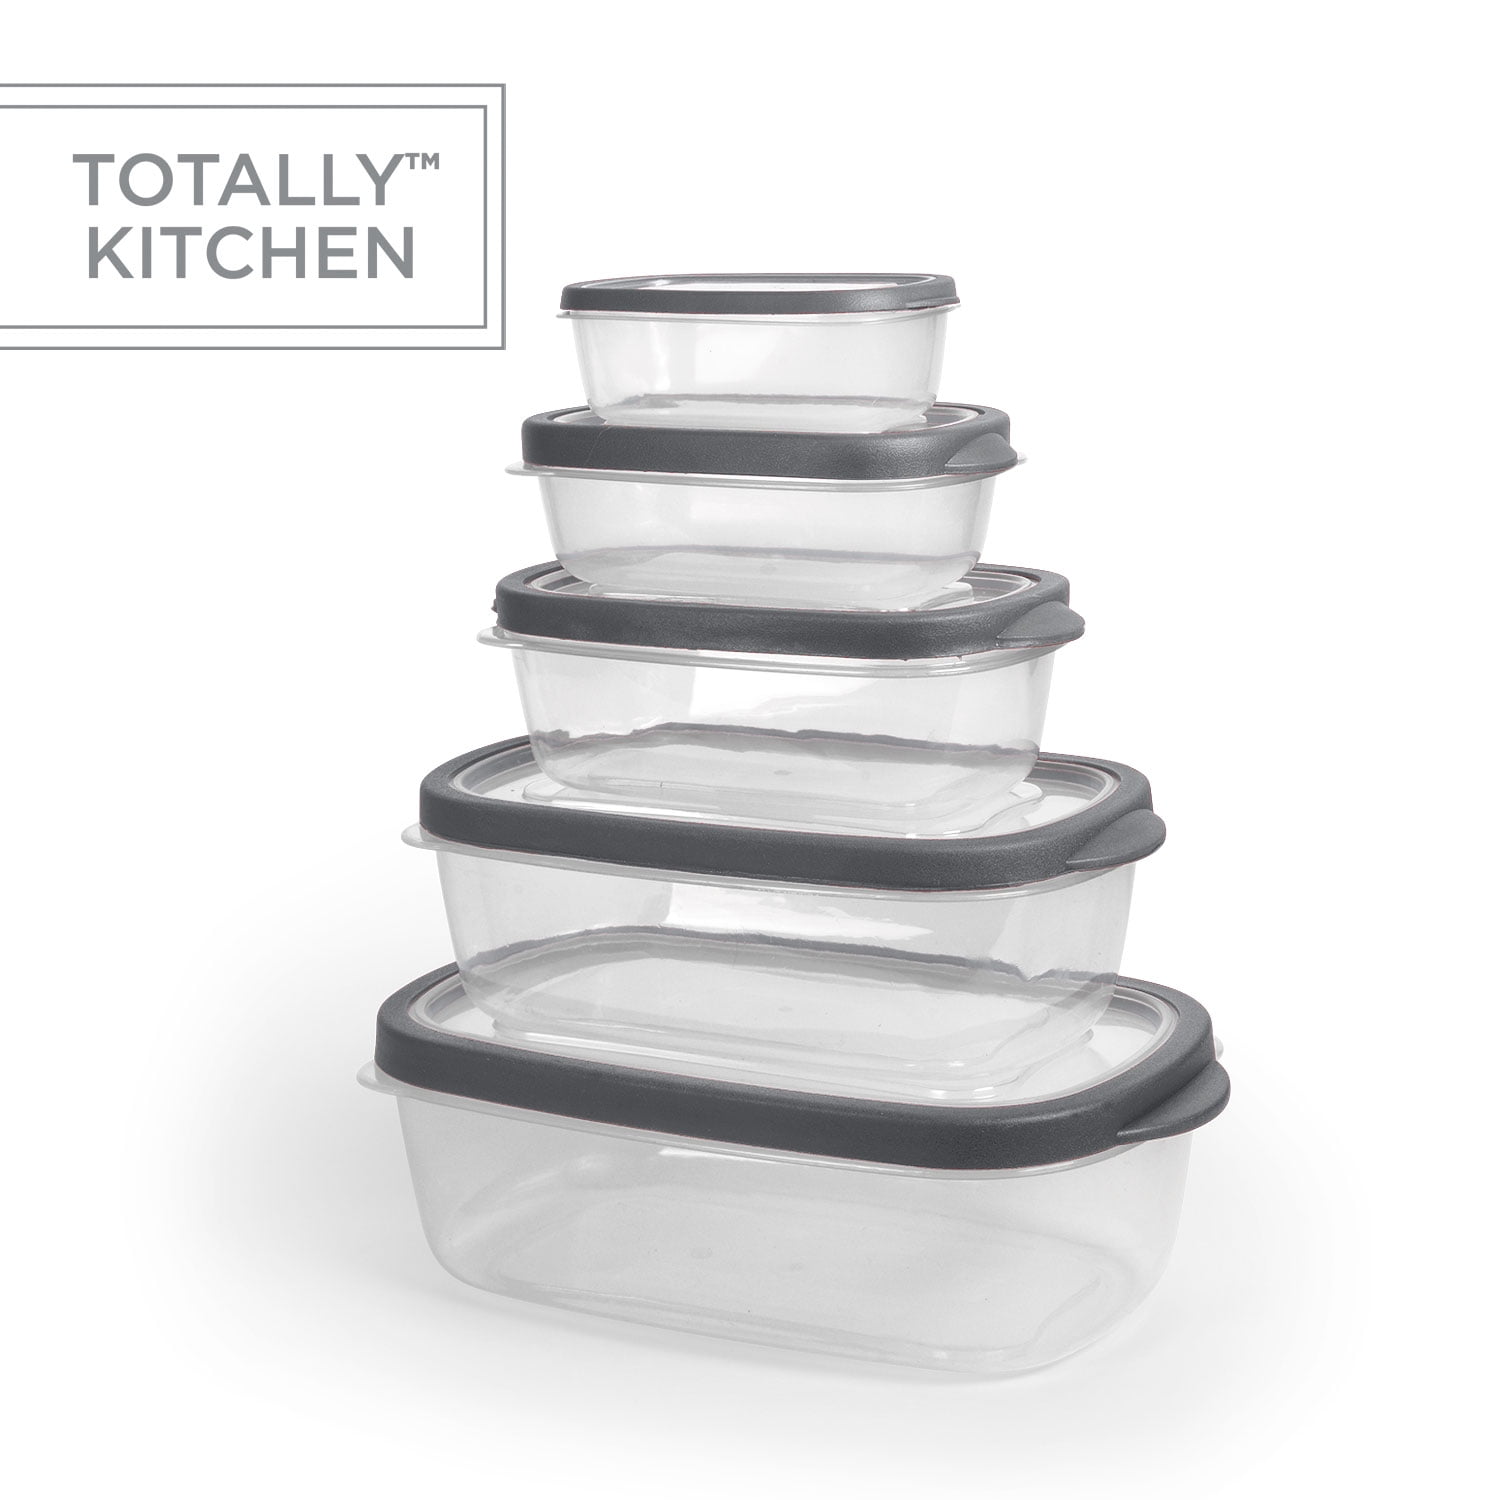 Food Storage Containers LOCK BOX w/Vented Lid. 8 Piece Set. BPA Free. Brand  New